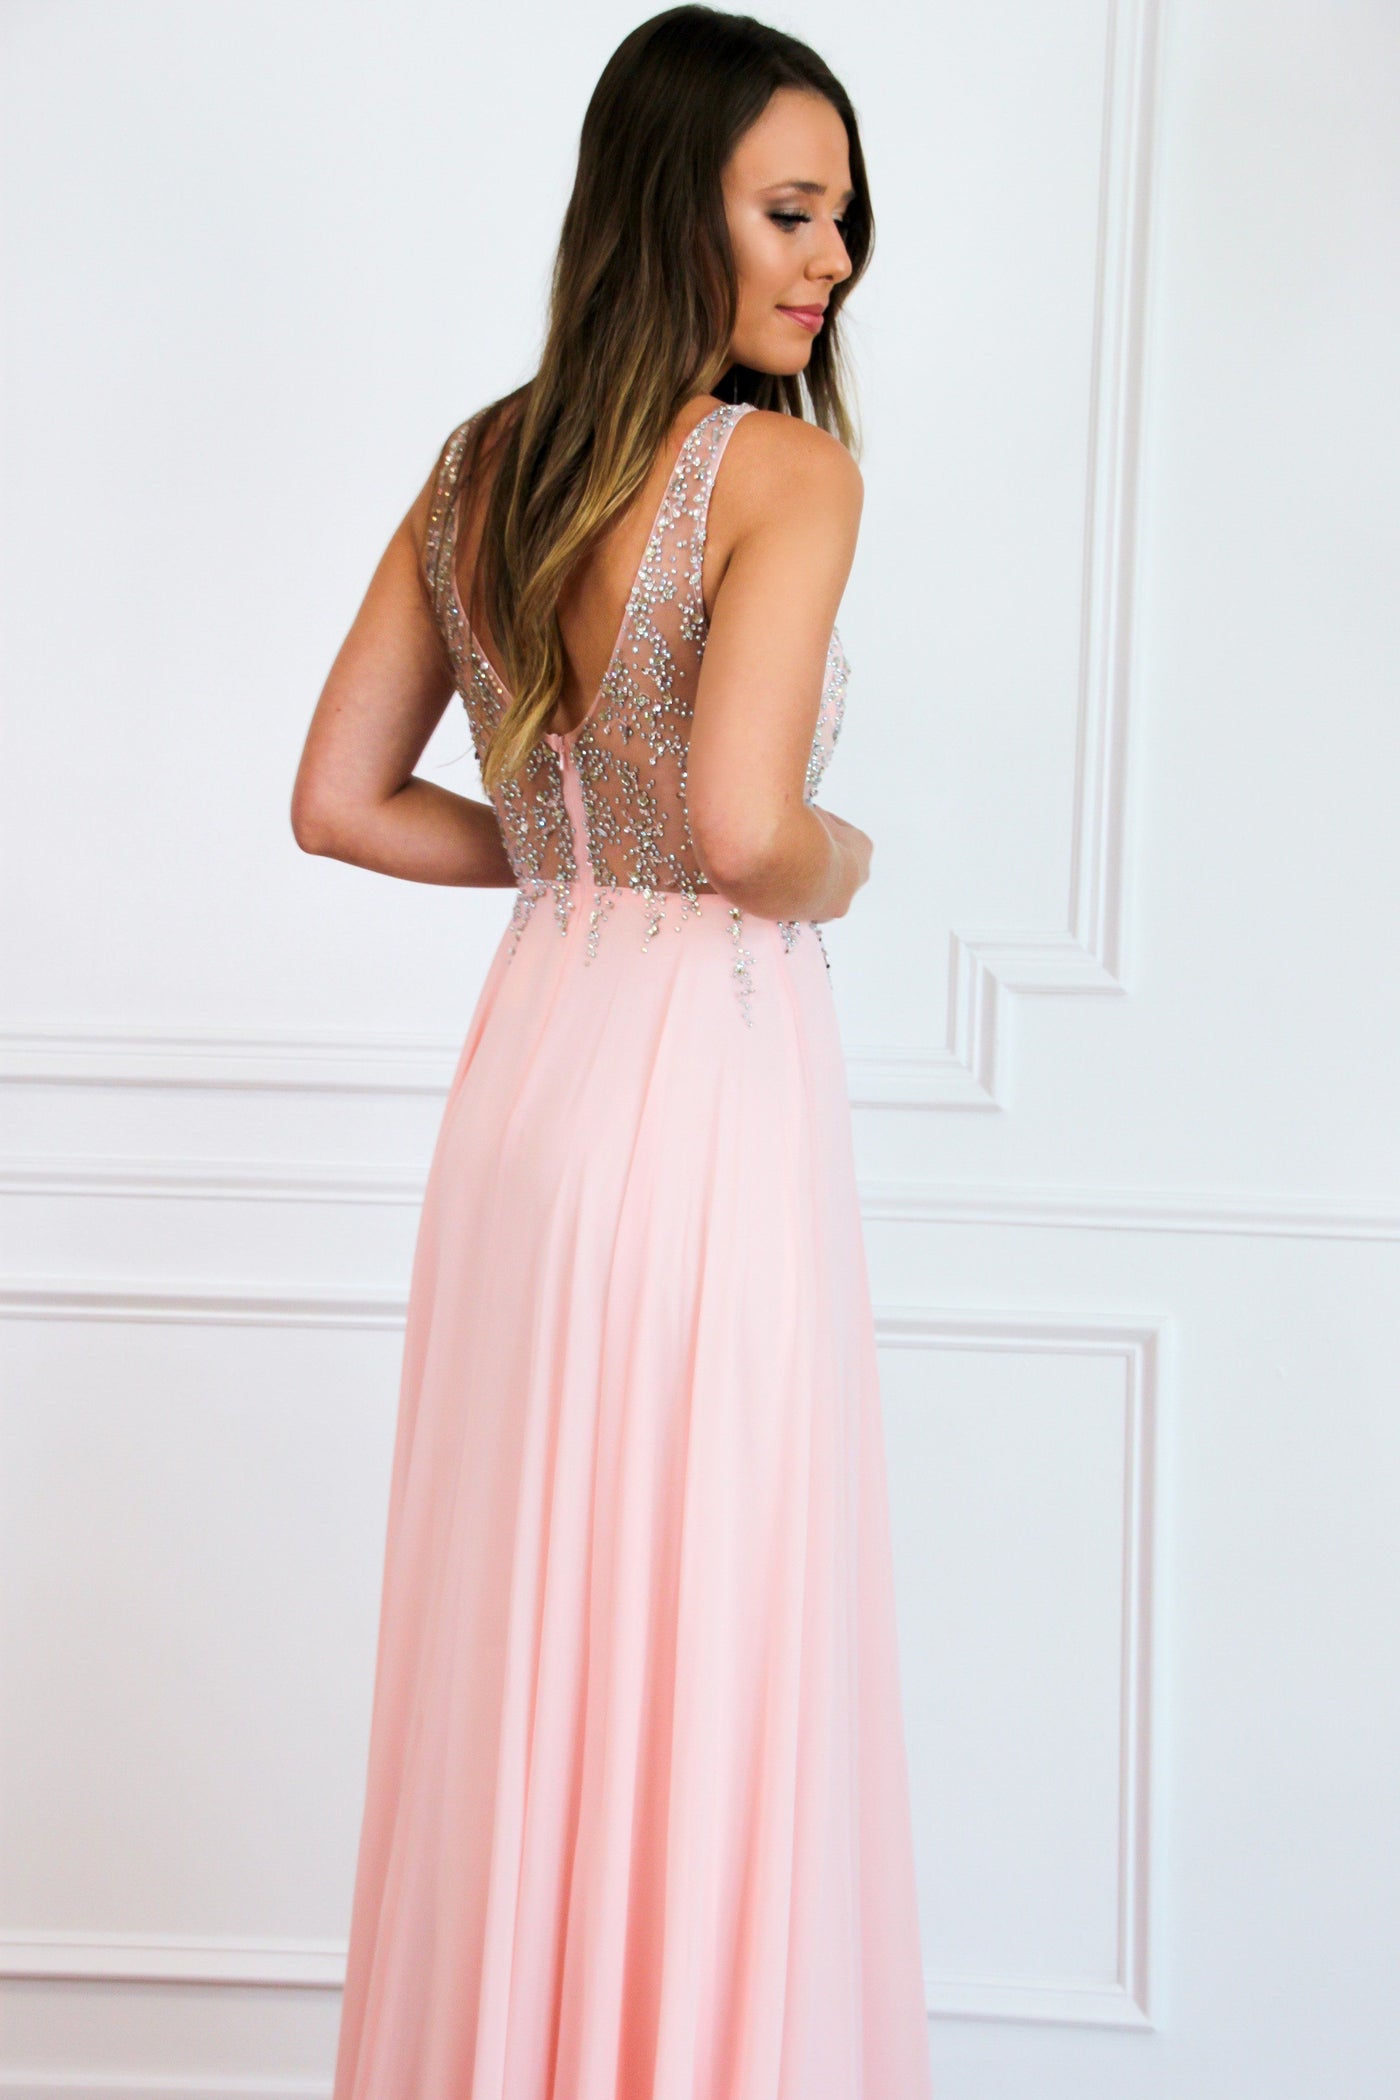 Sparkle in the Night Nude Illusion Formal Dress: Light Pink - Bella and Bloom Boutique